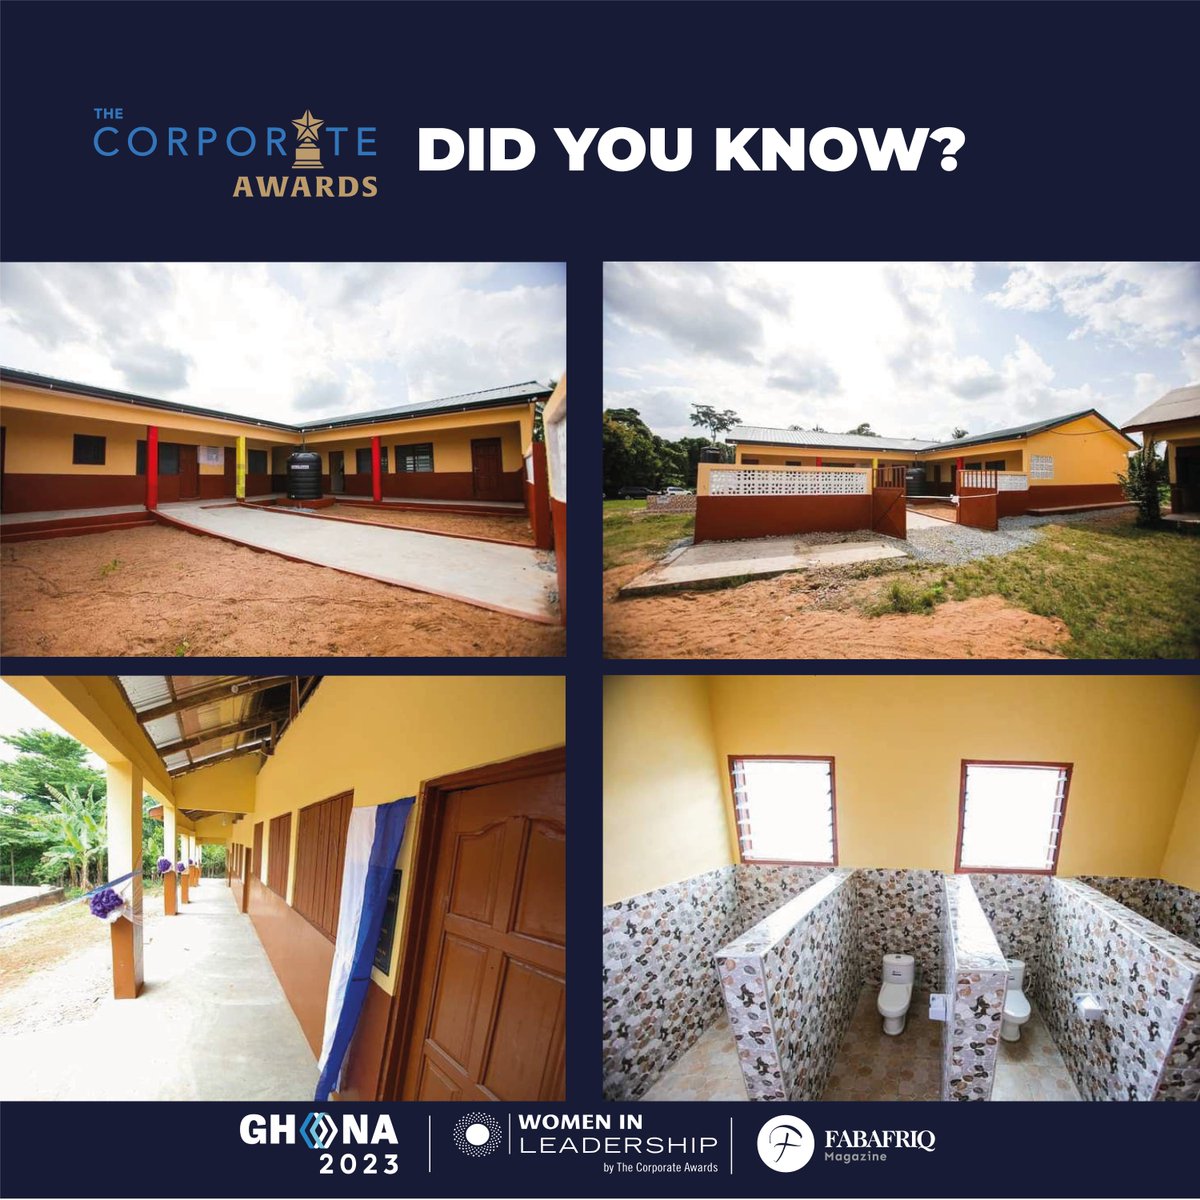 🛑Did you Know? 🛑

The @NPAGhana  inaugurated two new classroom blocks for two schools in the Eastern Region of Ghana.

Nominate your company for the 9th Edition for The Corporate Awards and have your actions recognised on a grand stage!

👇👇